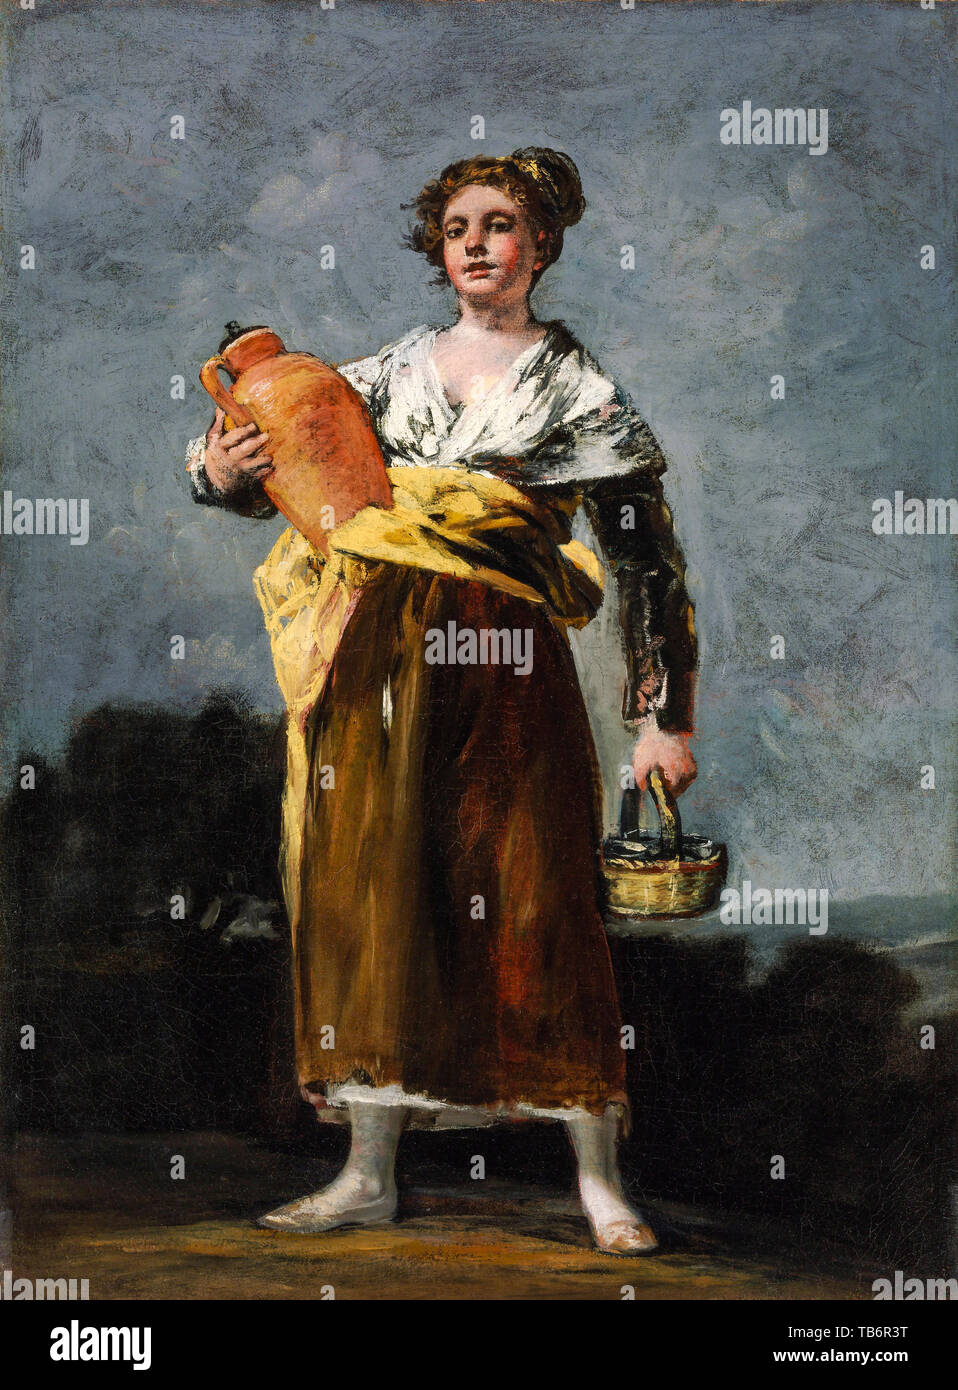 Francisco Goya, The Water Carrier, portrait painting, circa 1808 Stock Photo